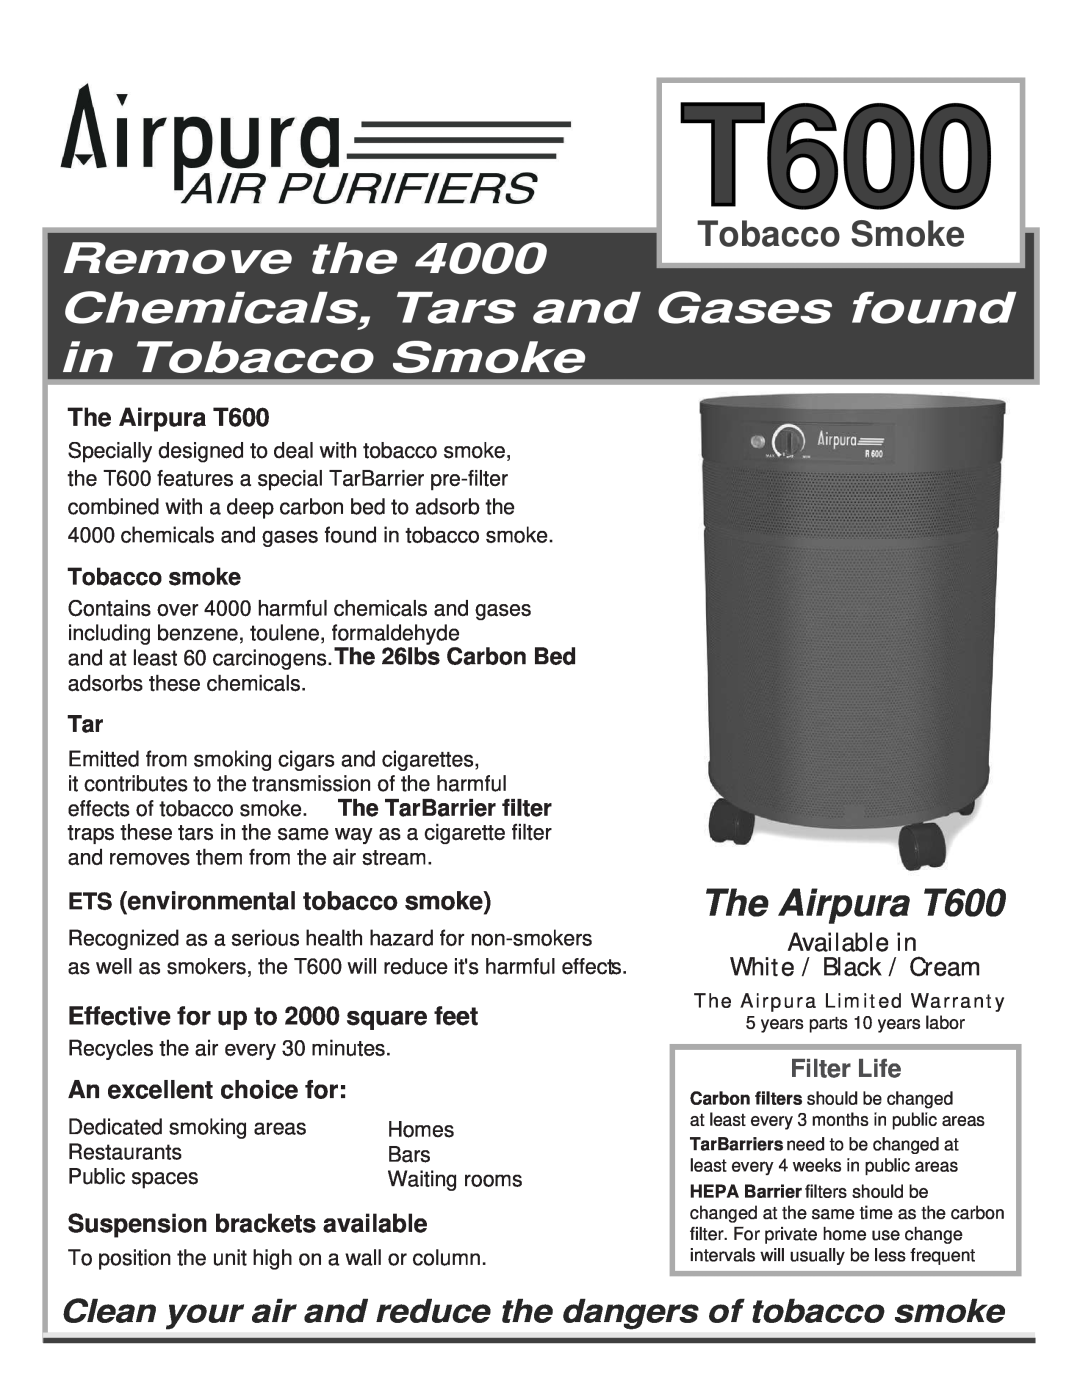 Airpura Industries warranty The Airpura T600, ETS environmental tobacco smoke, Effective for up to 2000 square feet 